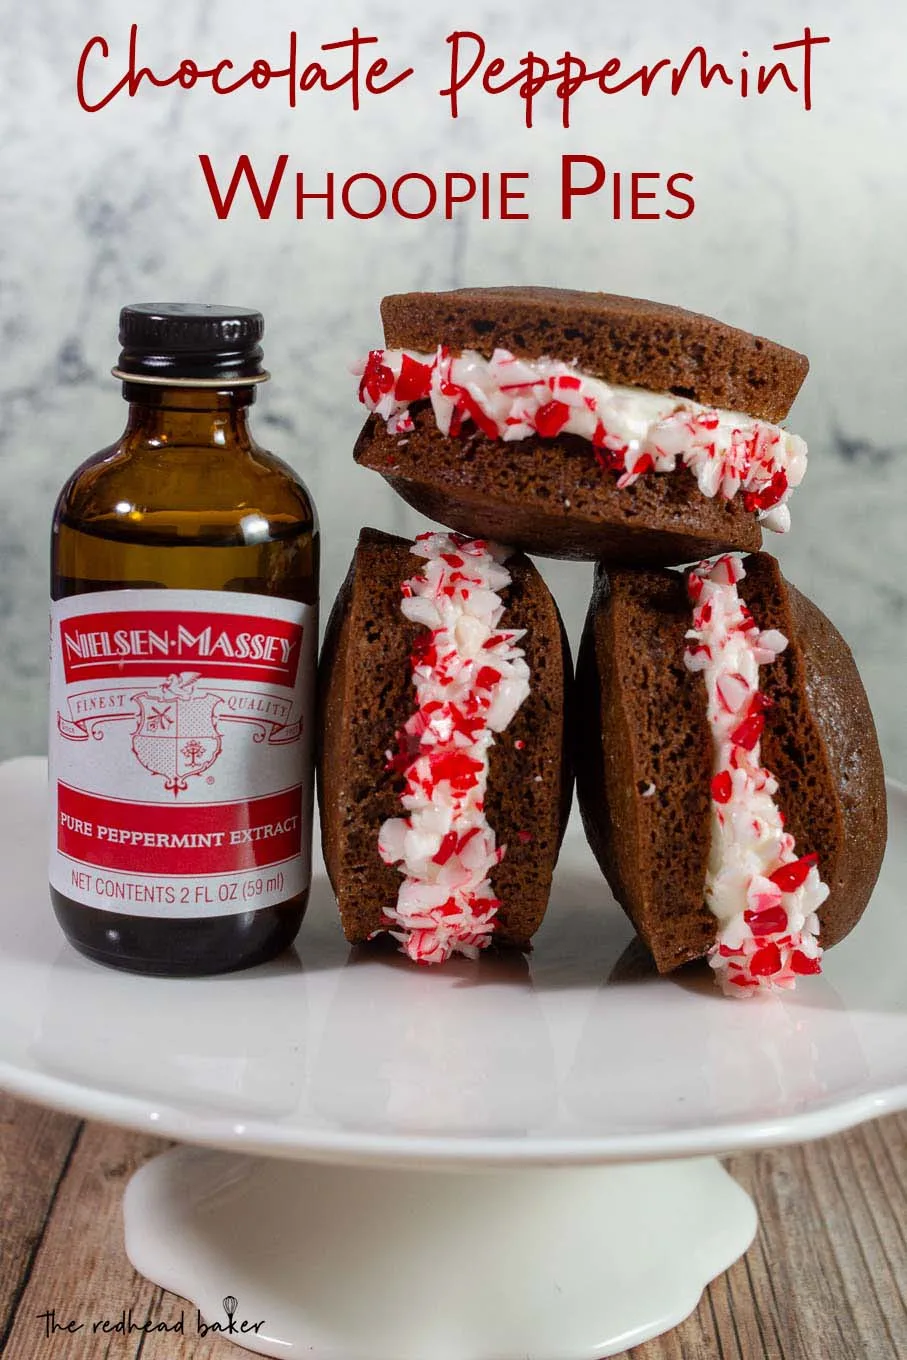 Three chocolate peppermint whoopie pies next to a bottle of Nielsen-Massey peppermint extract